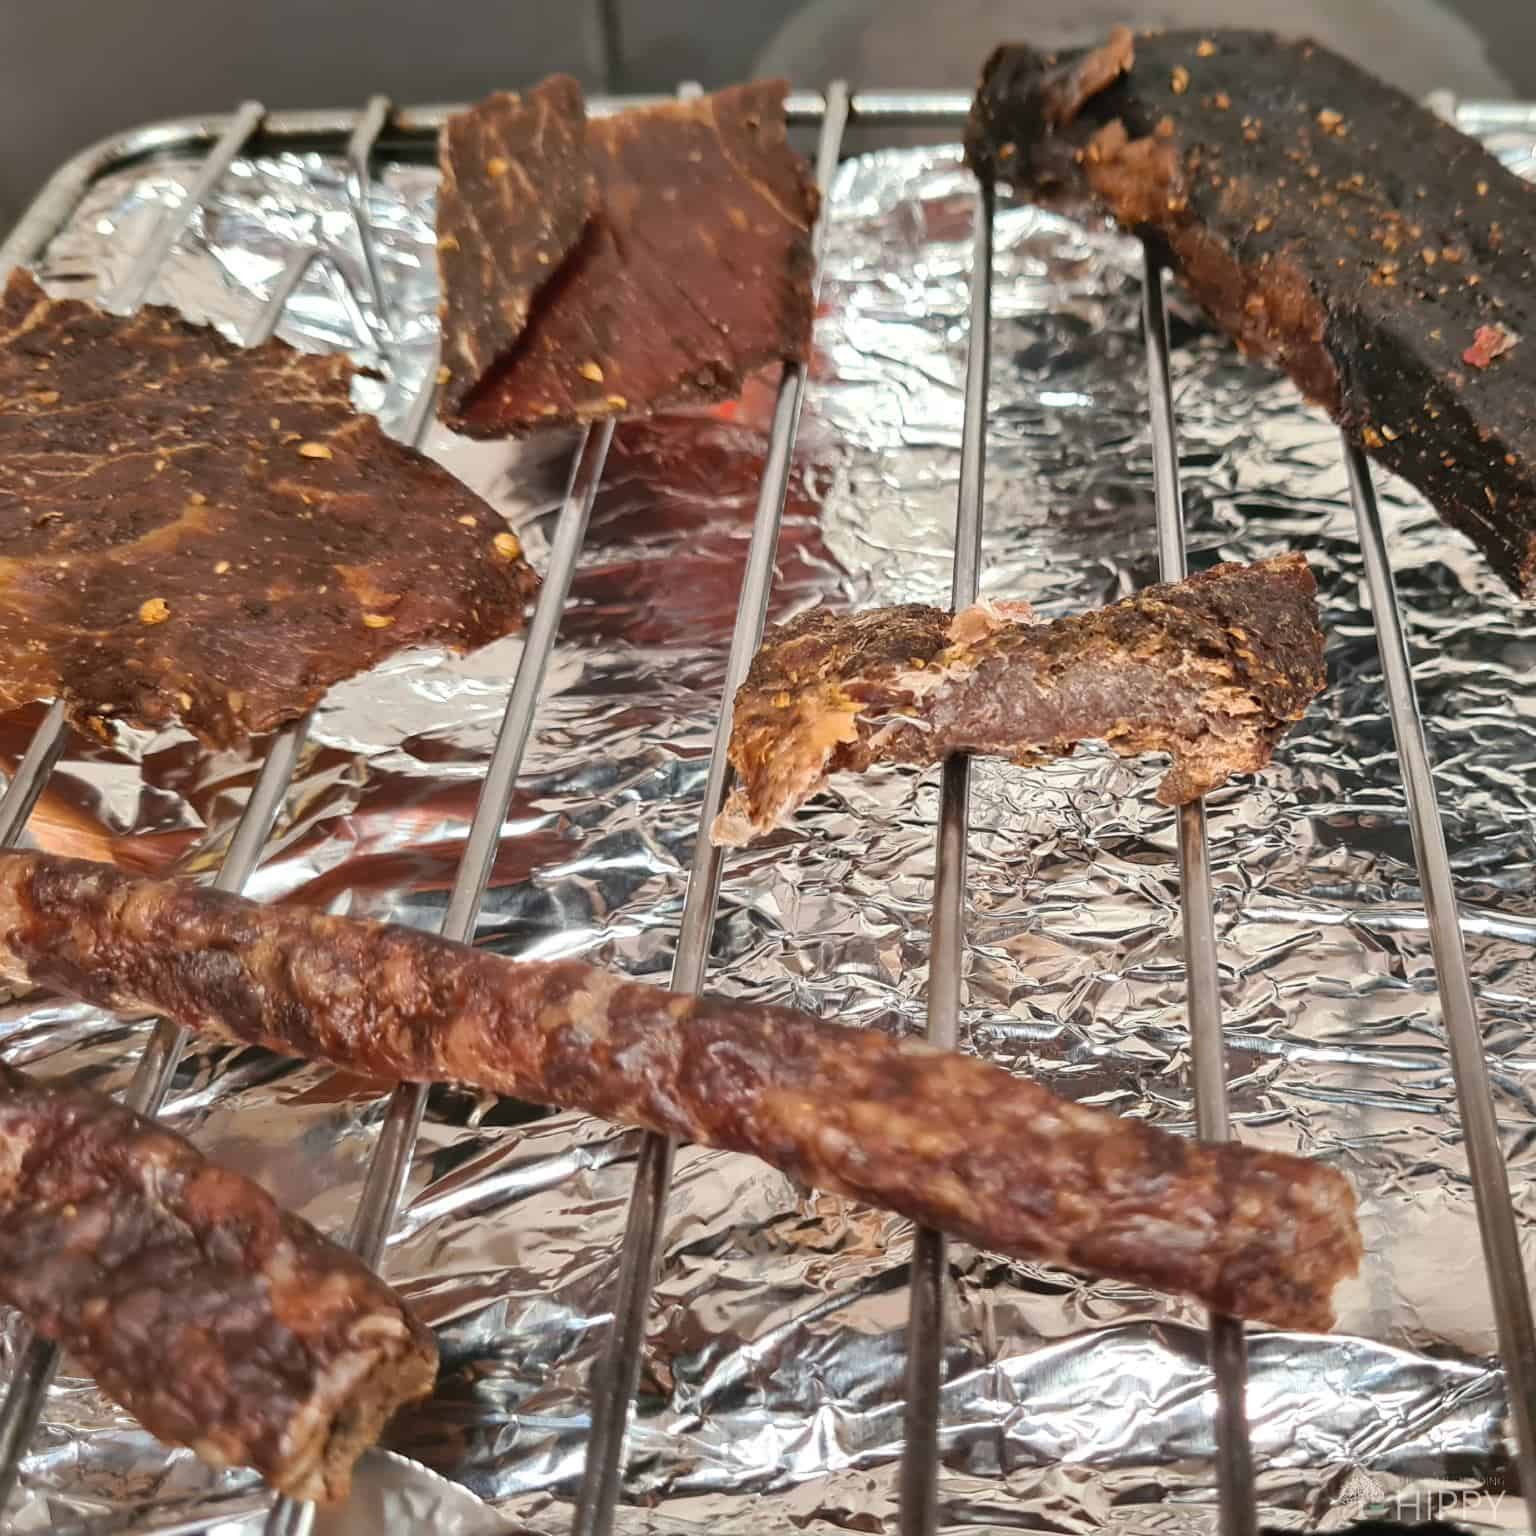 beef jerky and sausages on oven grill above tray